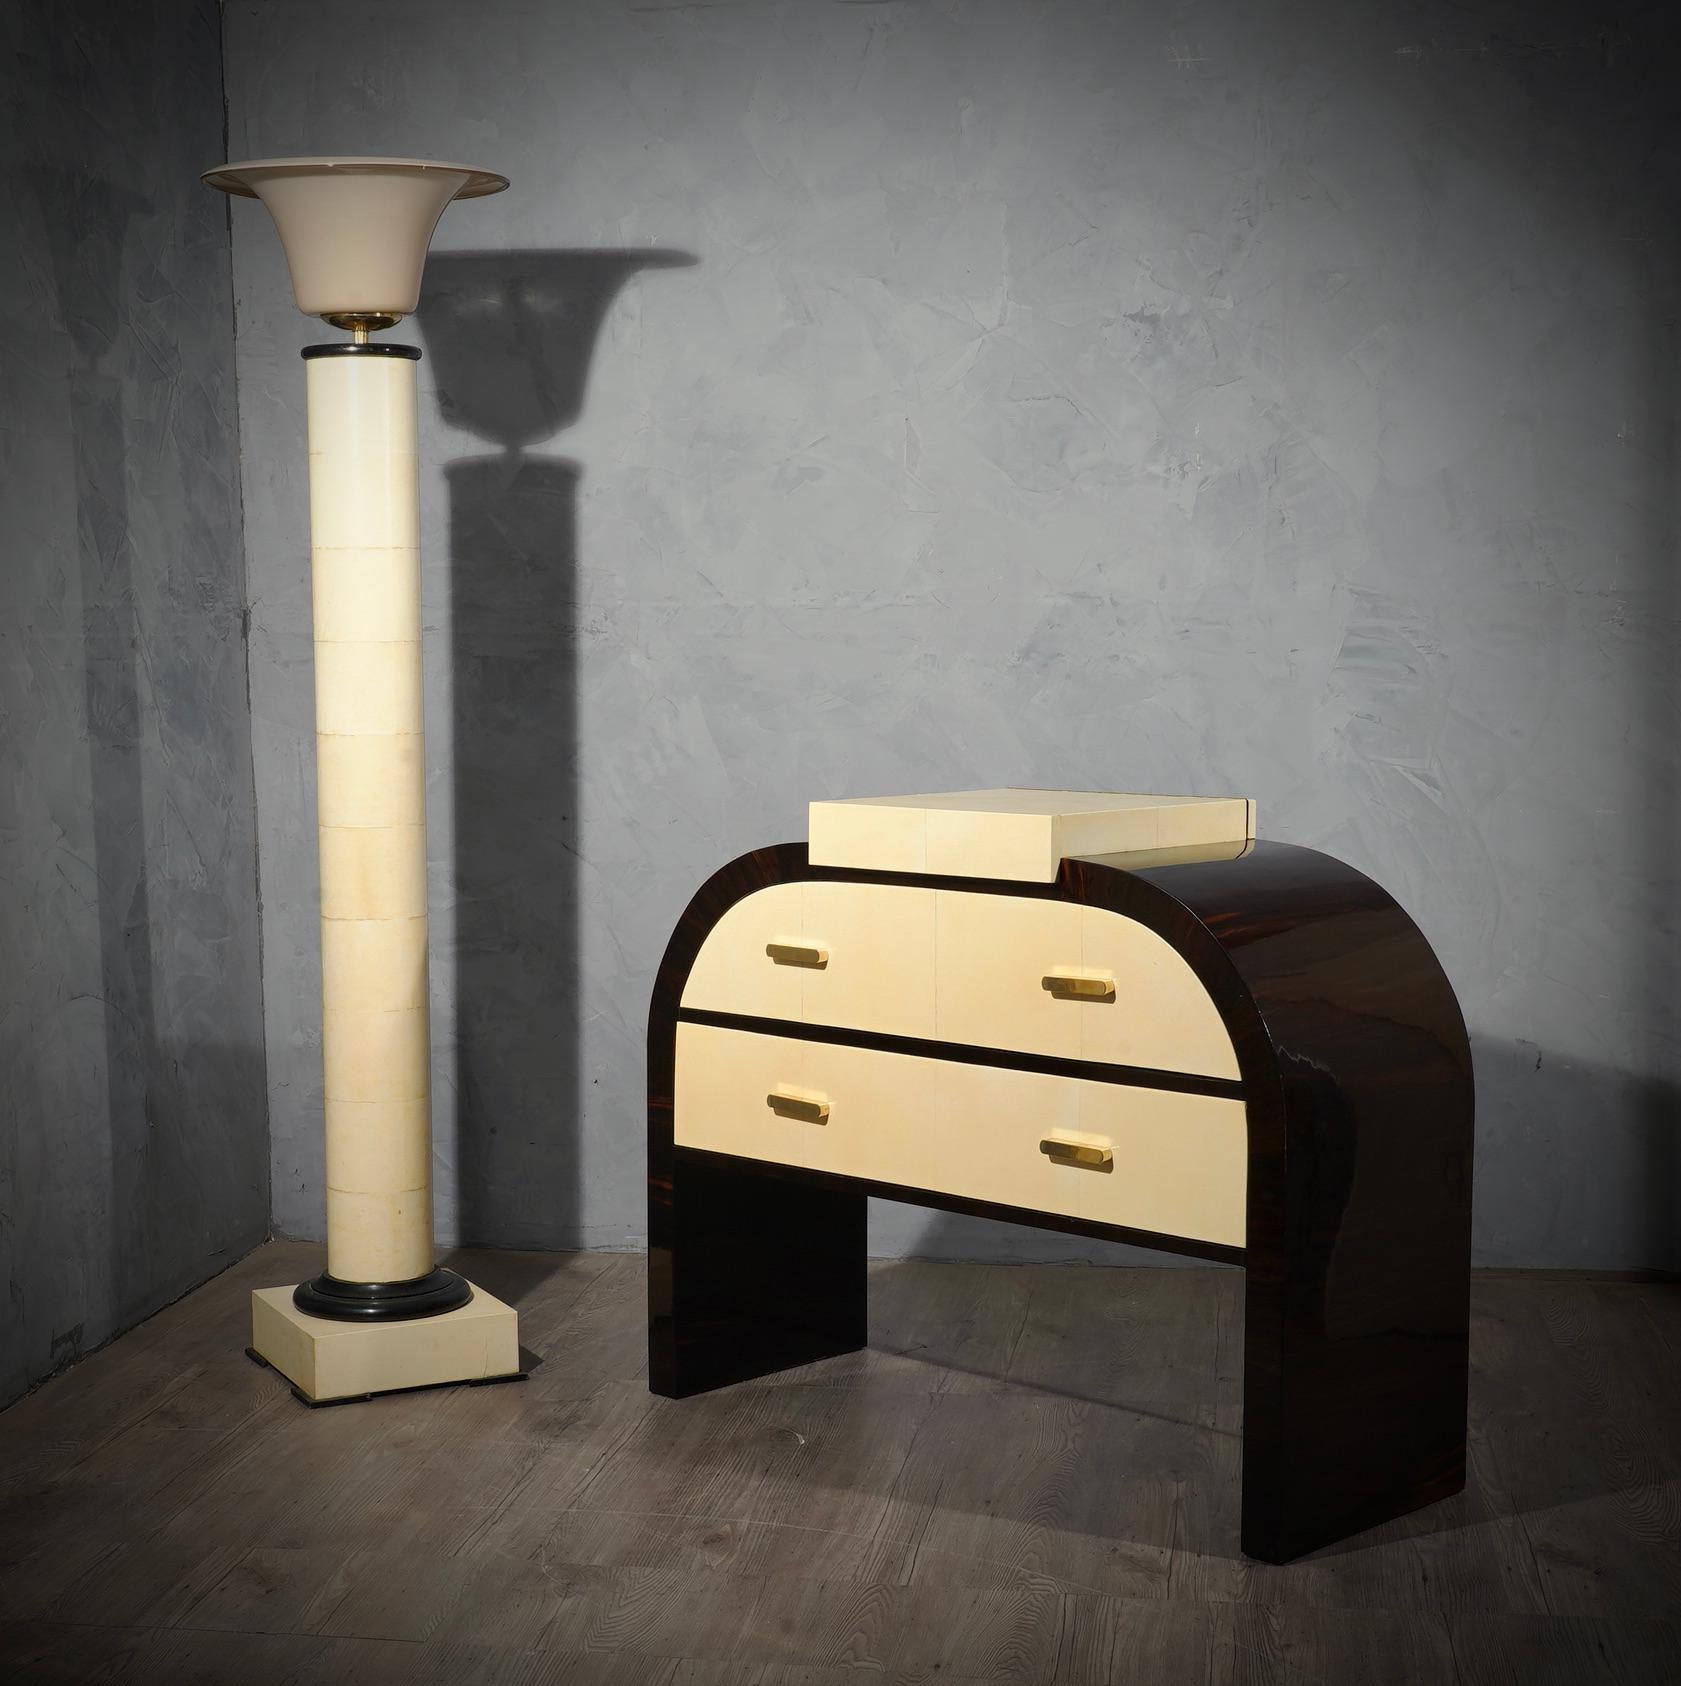 Sinuous shapes for this fine piece of furniture, all refinement and style, this chest of drawers knows no limits. Inspired by the upper-middle class gentleman, this charismatic dresser has an indisputable timeless design, truly classic of Italian